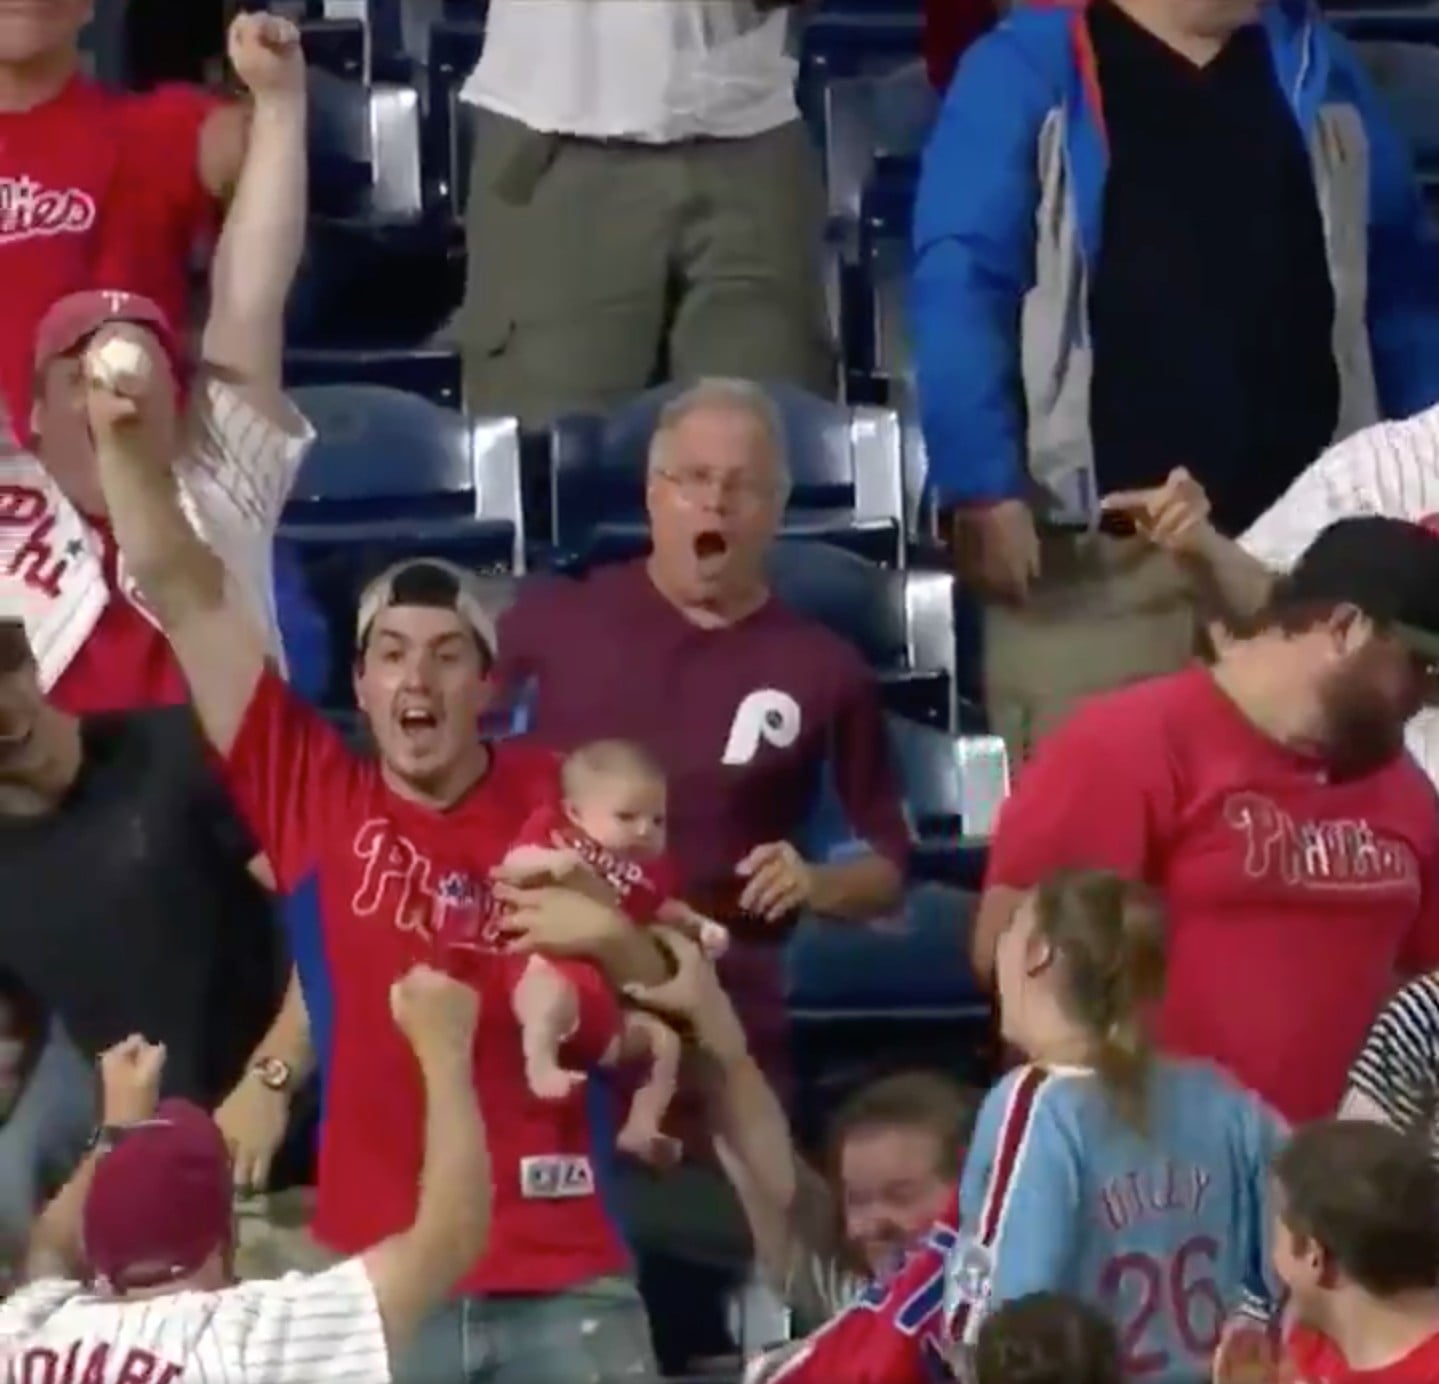 Dodgers Fan Catches Foul Ball While Holding His Baby and a Beer